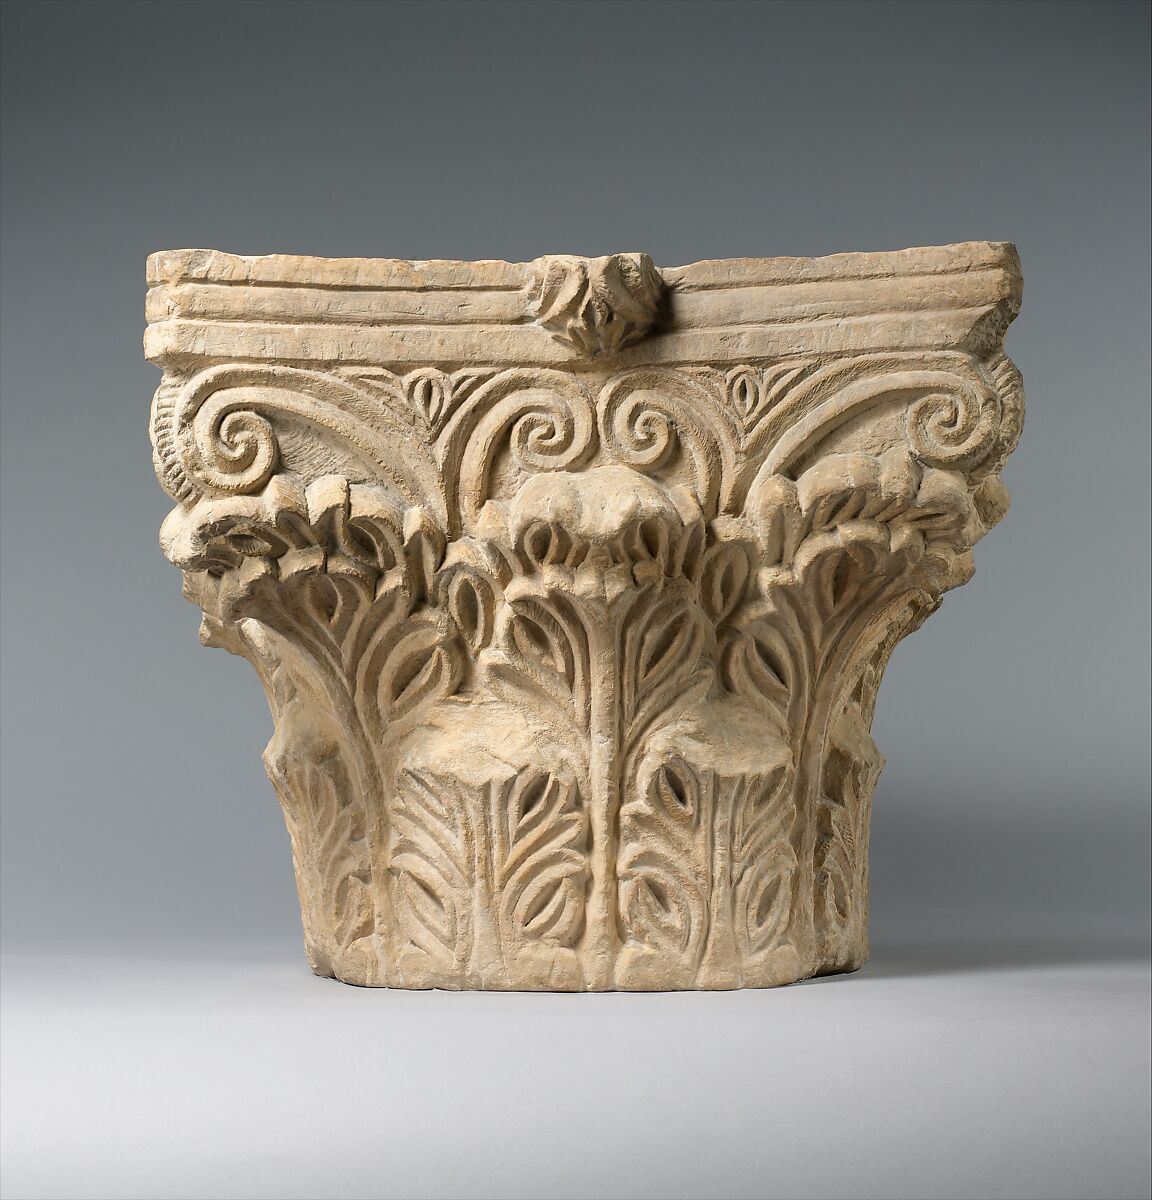 Capital with Acanthus Leaves, Limestone; carved 